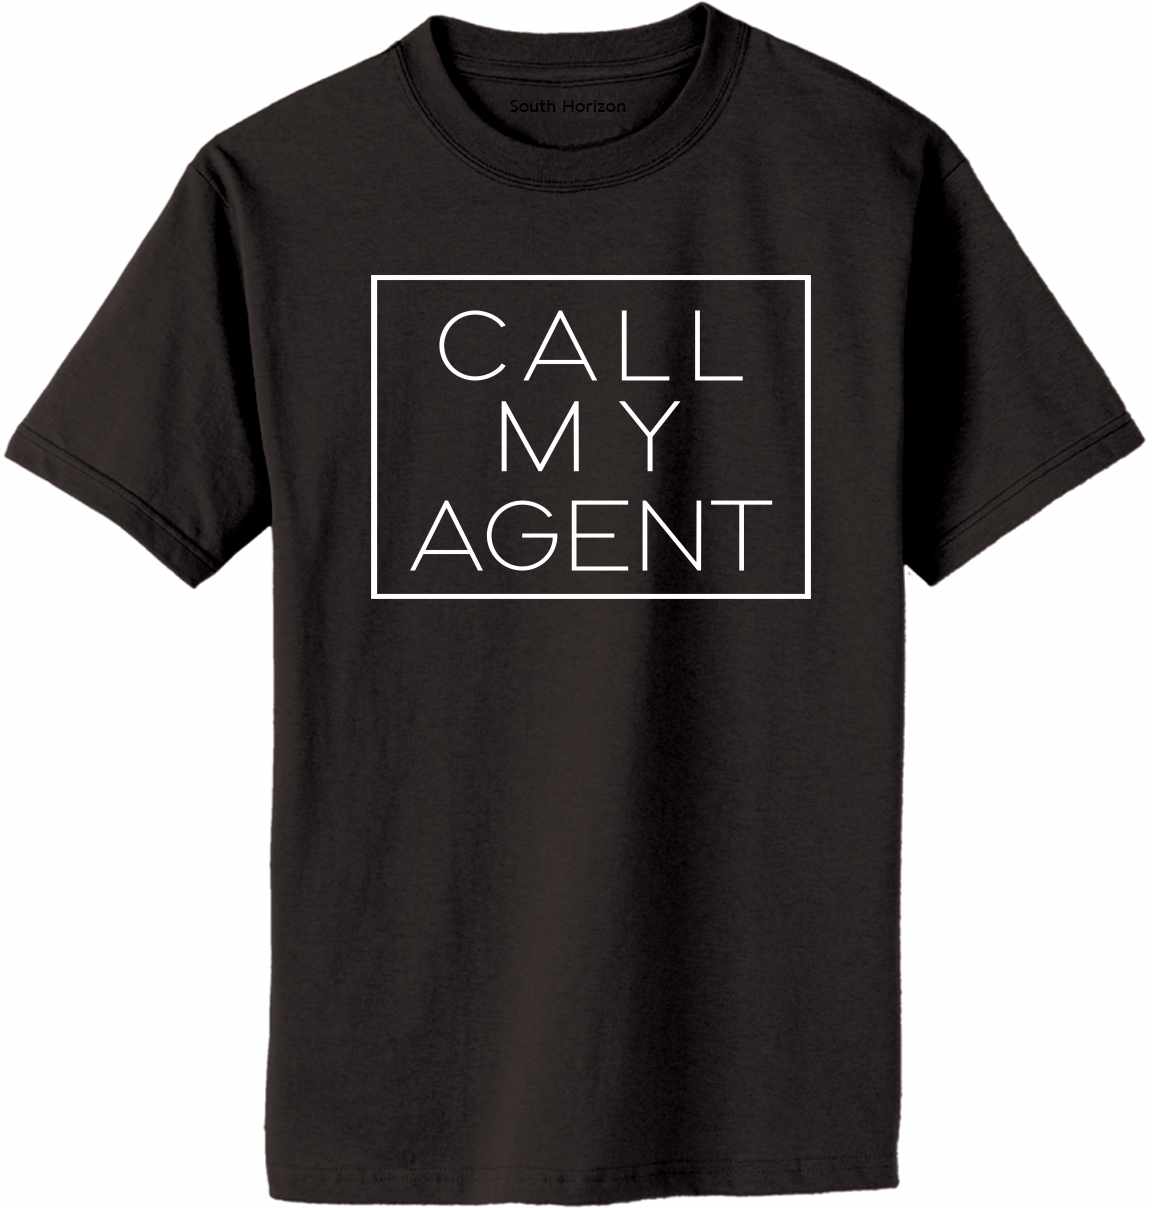 Call My Agent on Adult T-Shirt (#1390-1)